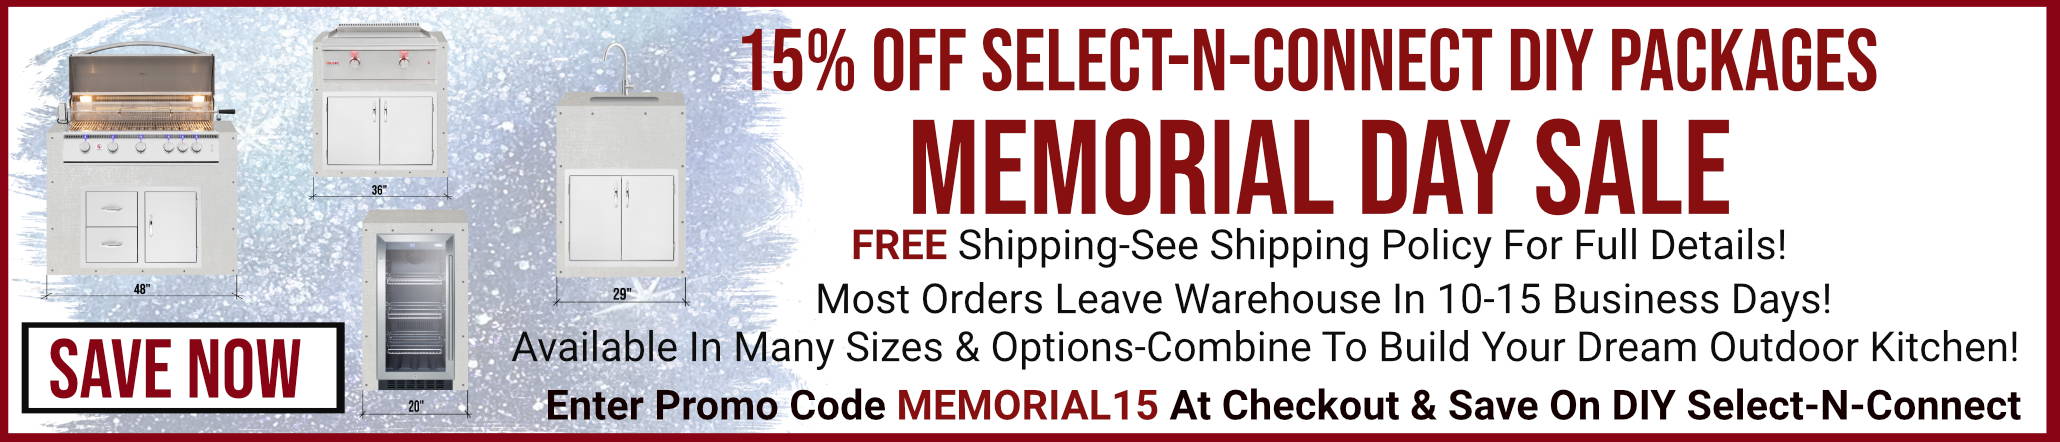 Select-N-Connect Memorial Day Sale